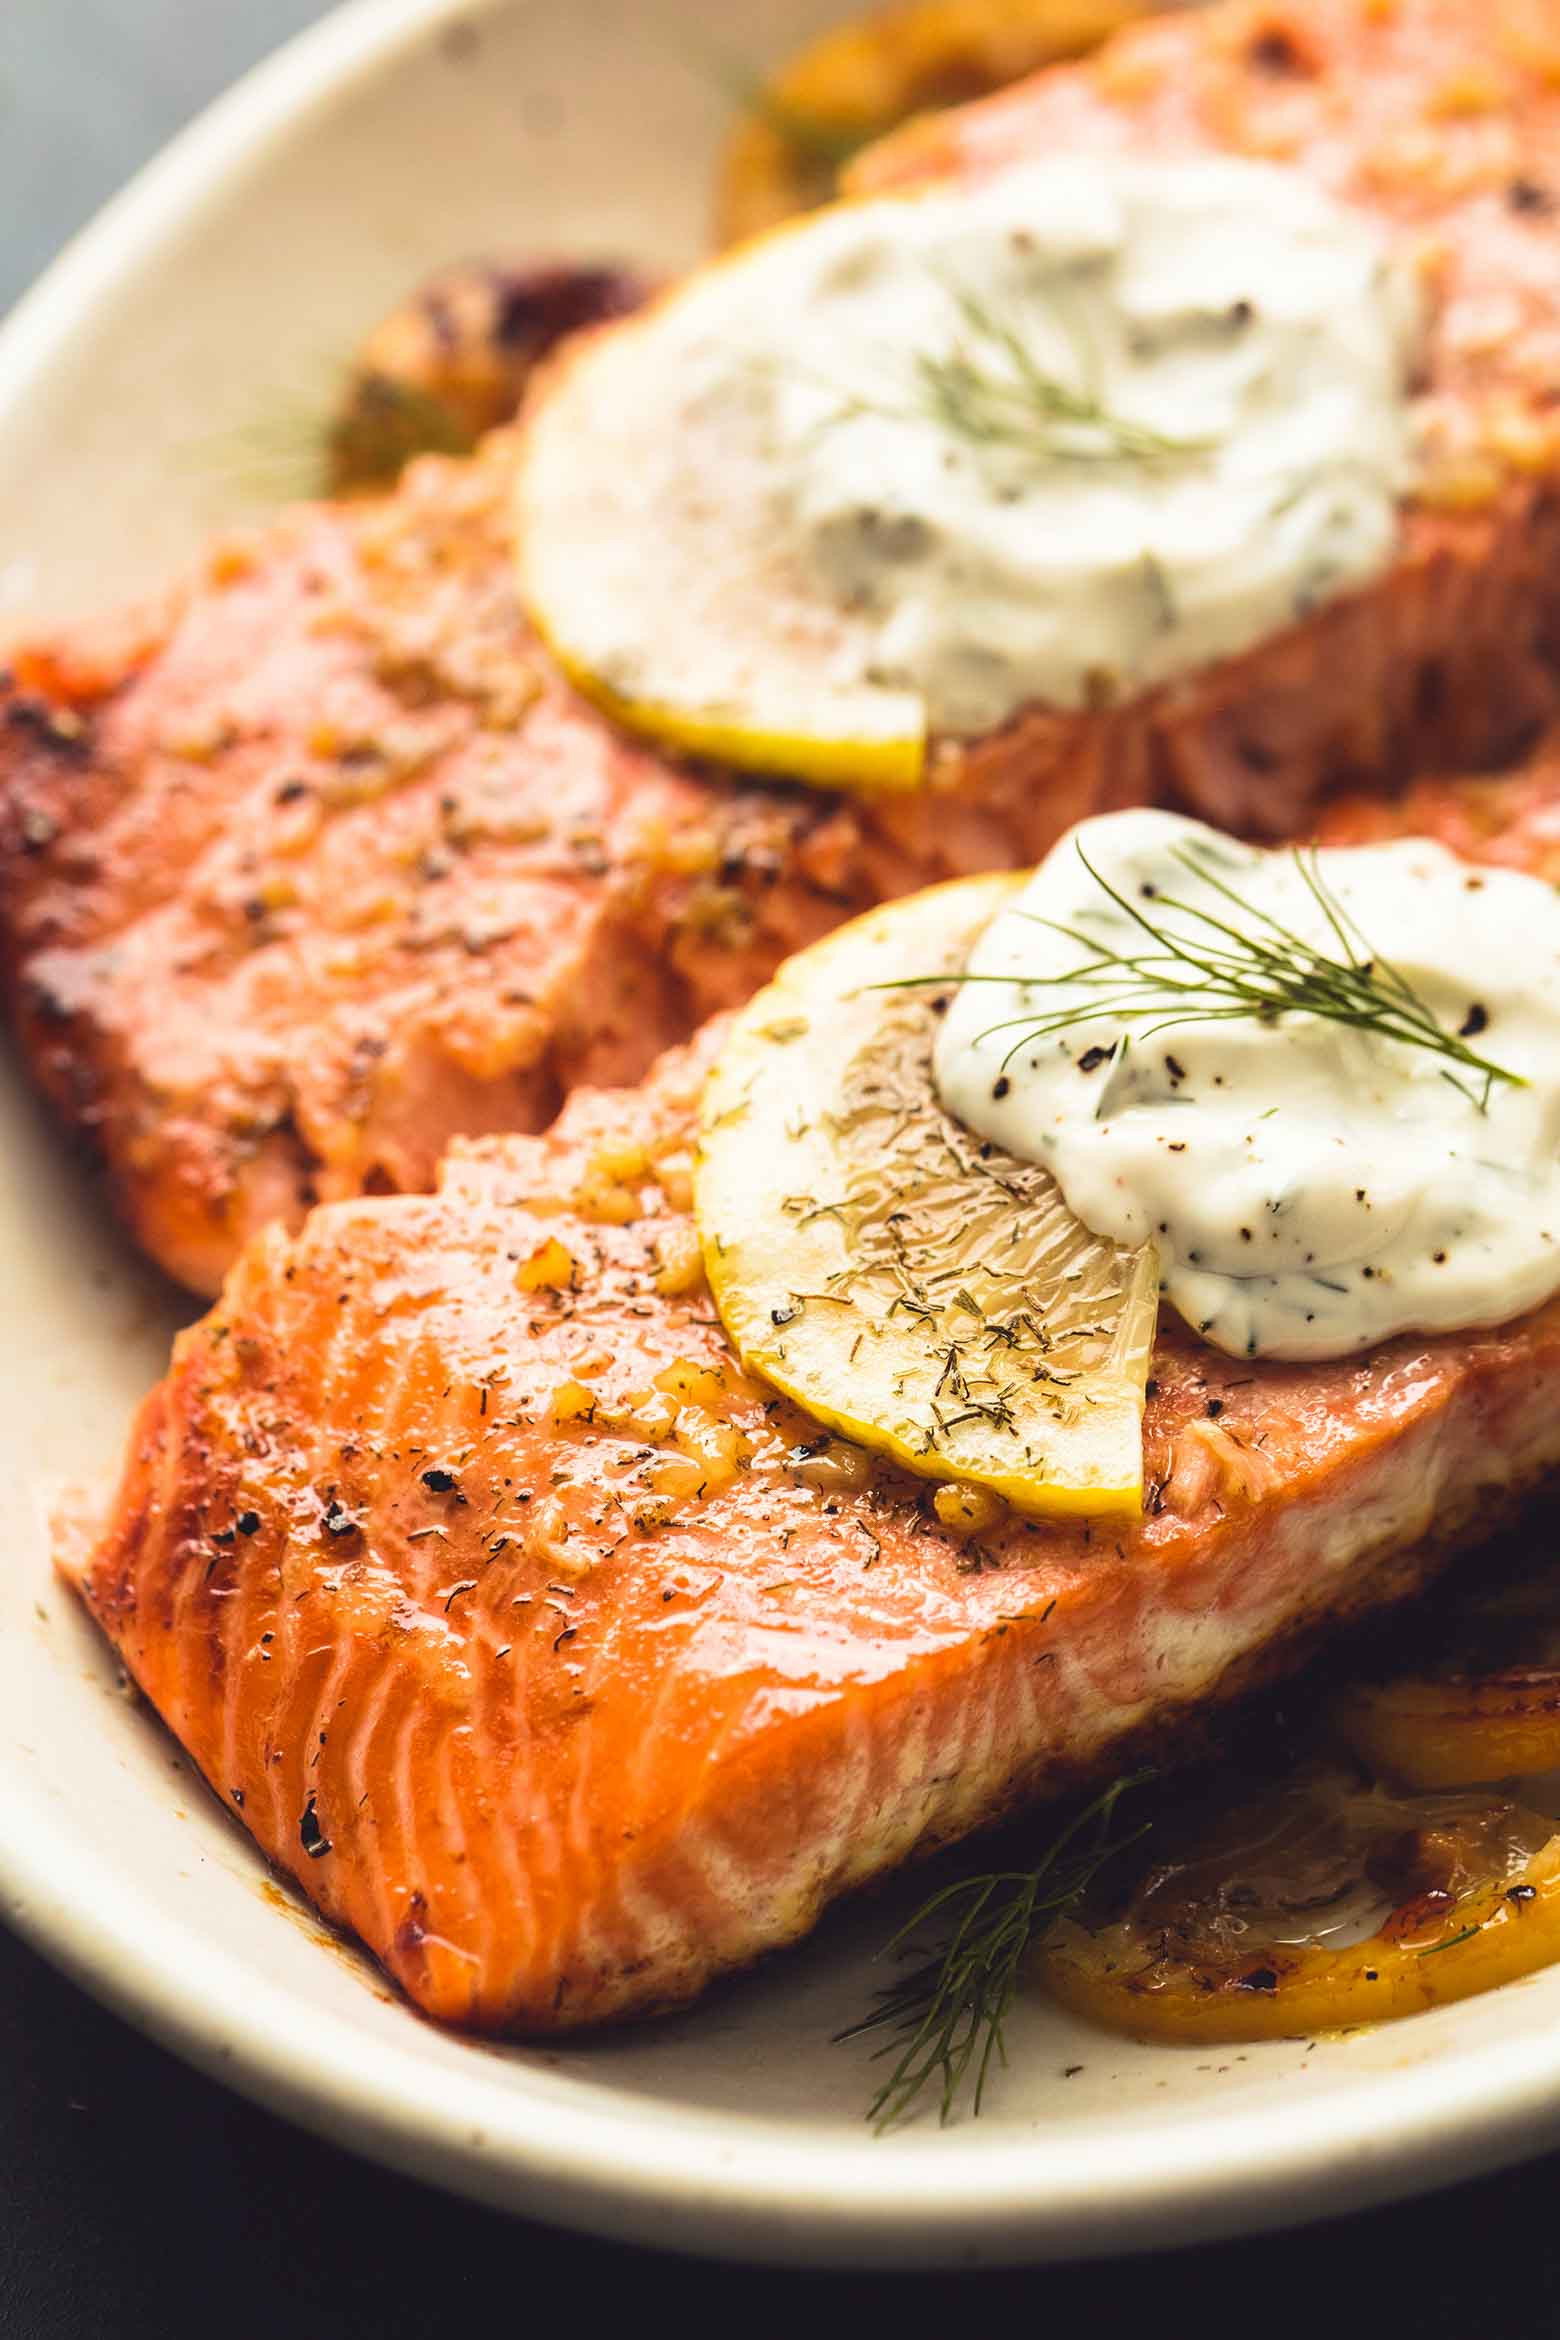 Sauces for Baked Salmon Fresh Baked Salmon with Creamy Lemon Dill Sauce – Cravings Happen